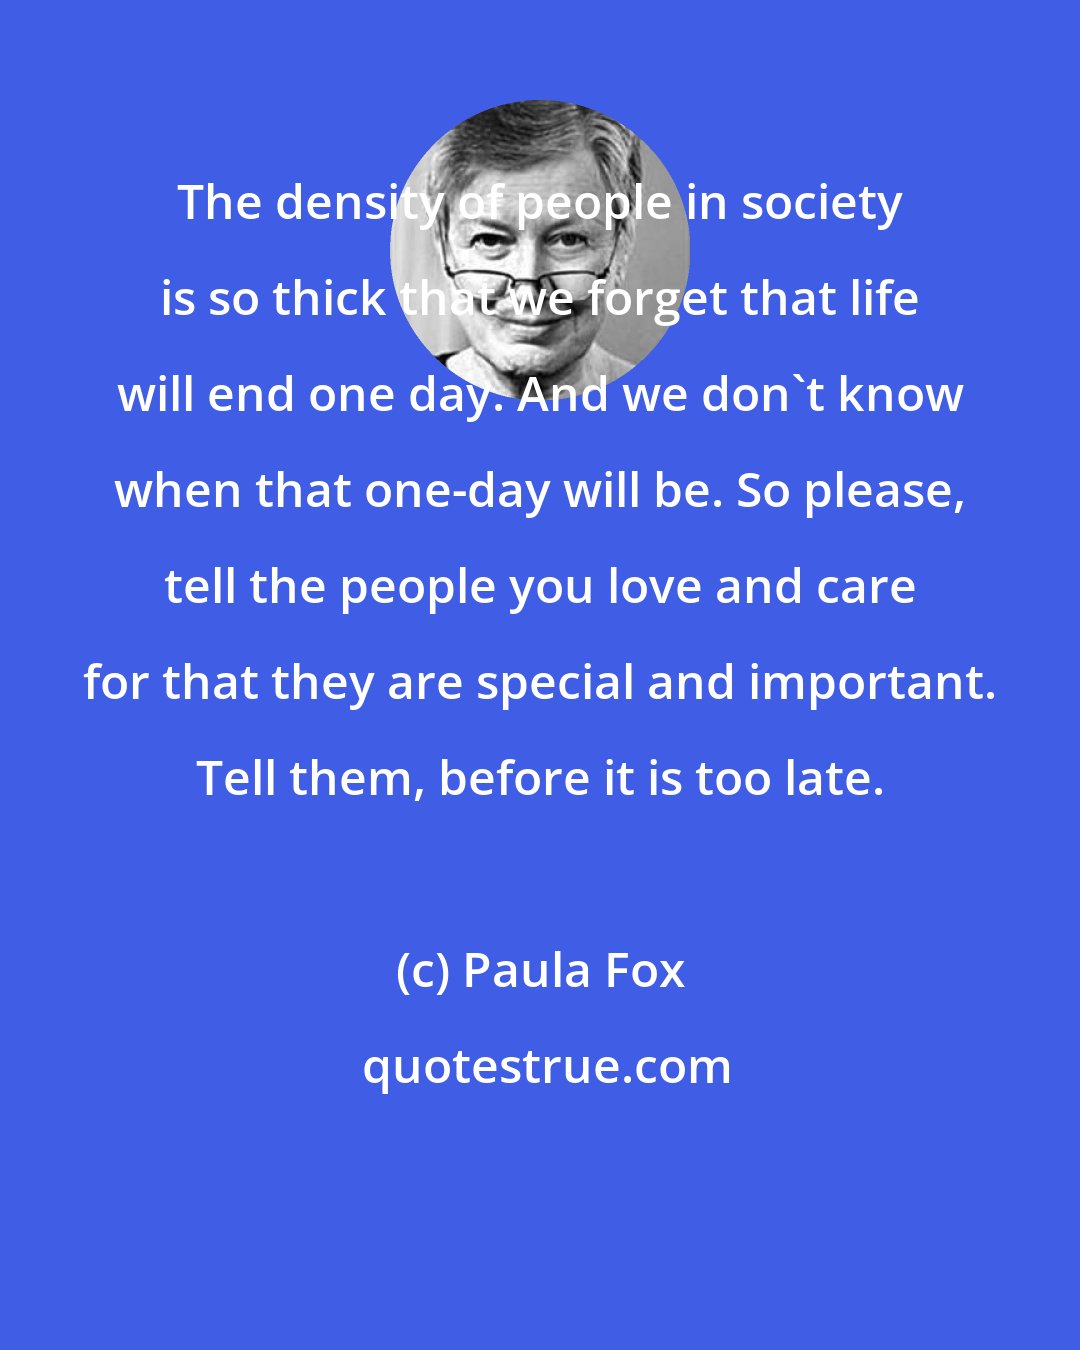 Paula Fox: The density of people in society is so thick that we forget that life will end one day. And we don't know when that one-day will be. So please, tell the people you love and care for that they are special and important. Tell them, before it is too late.